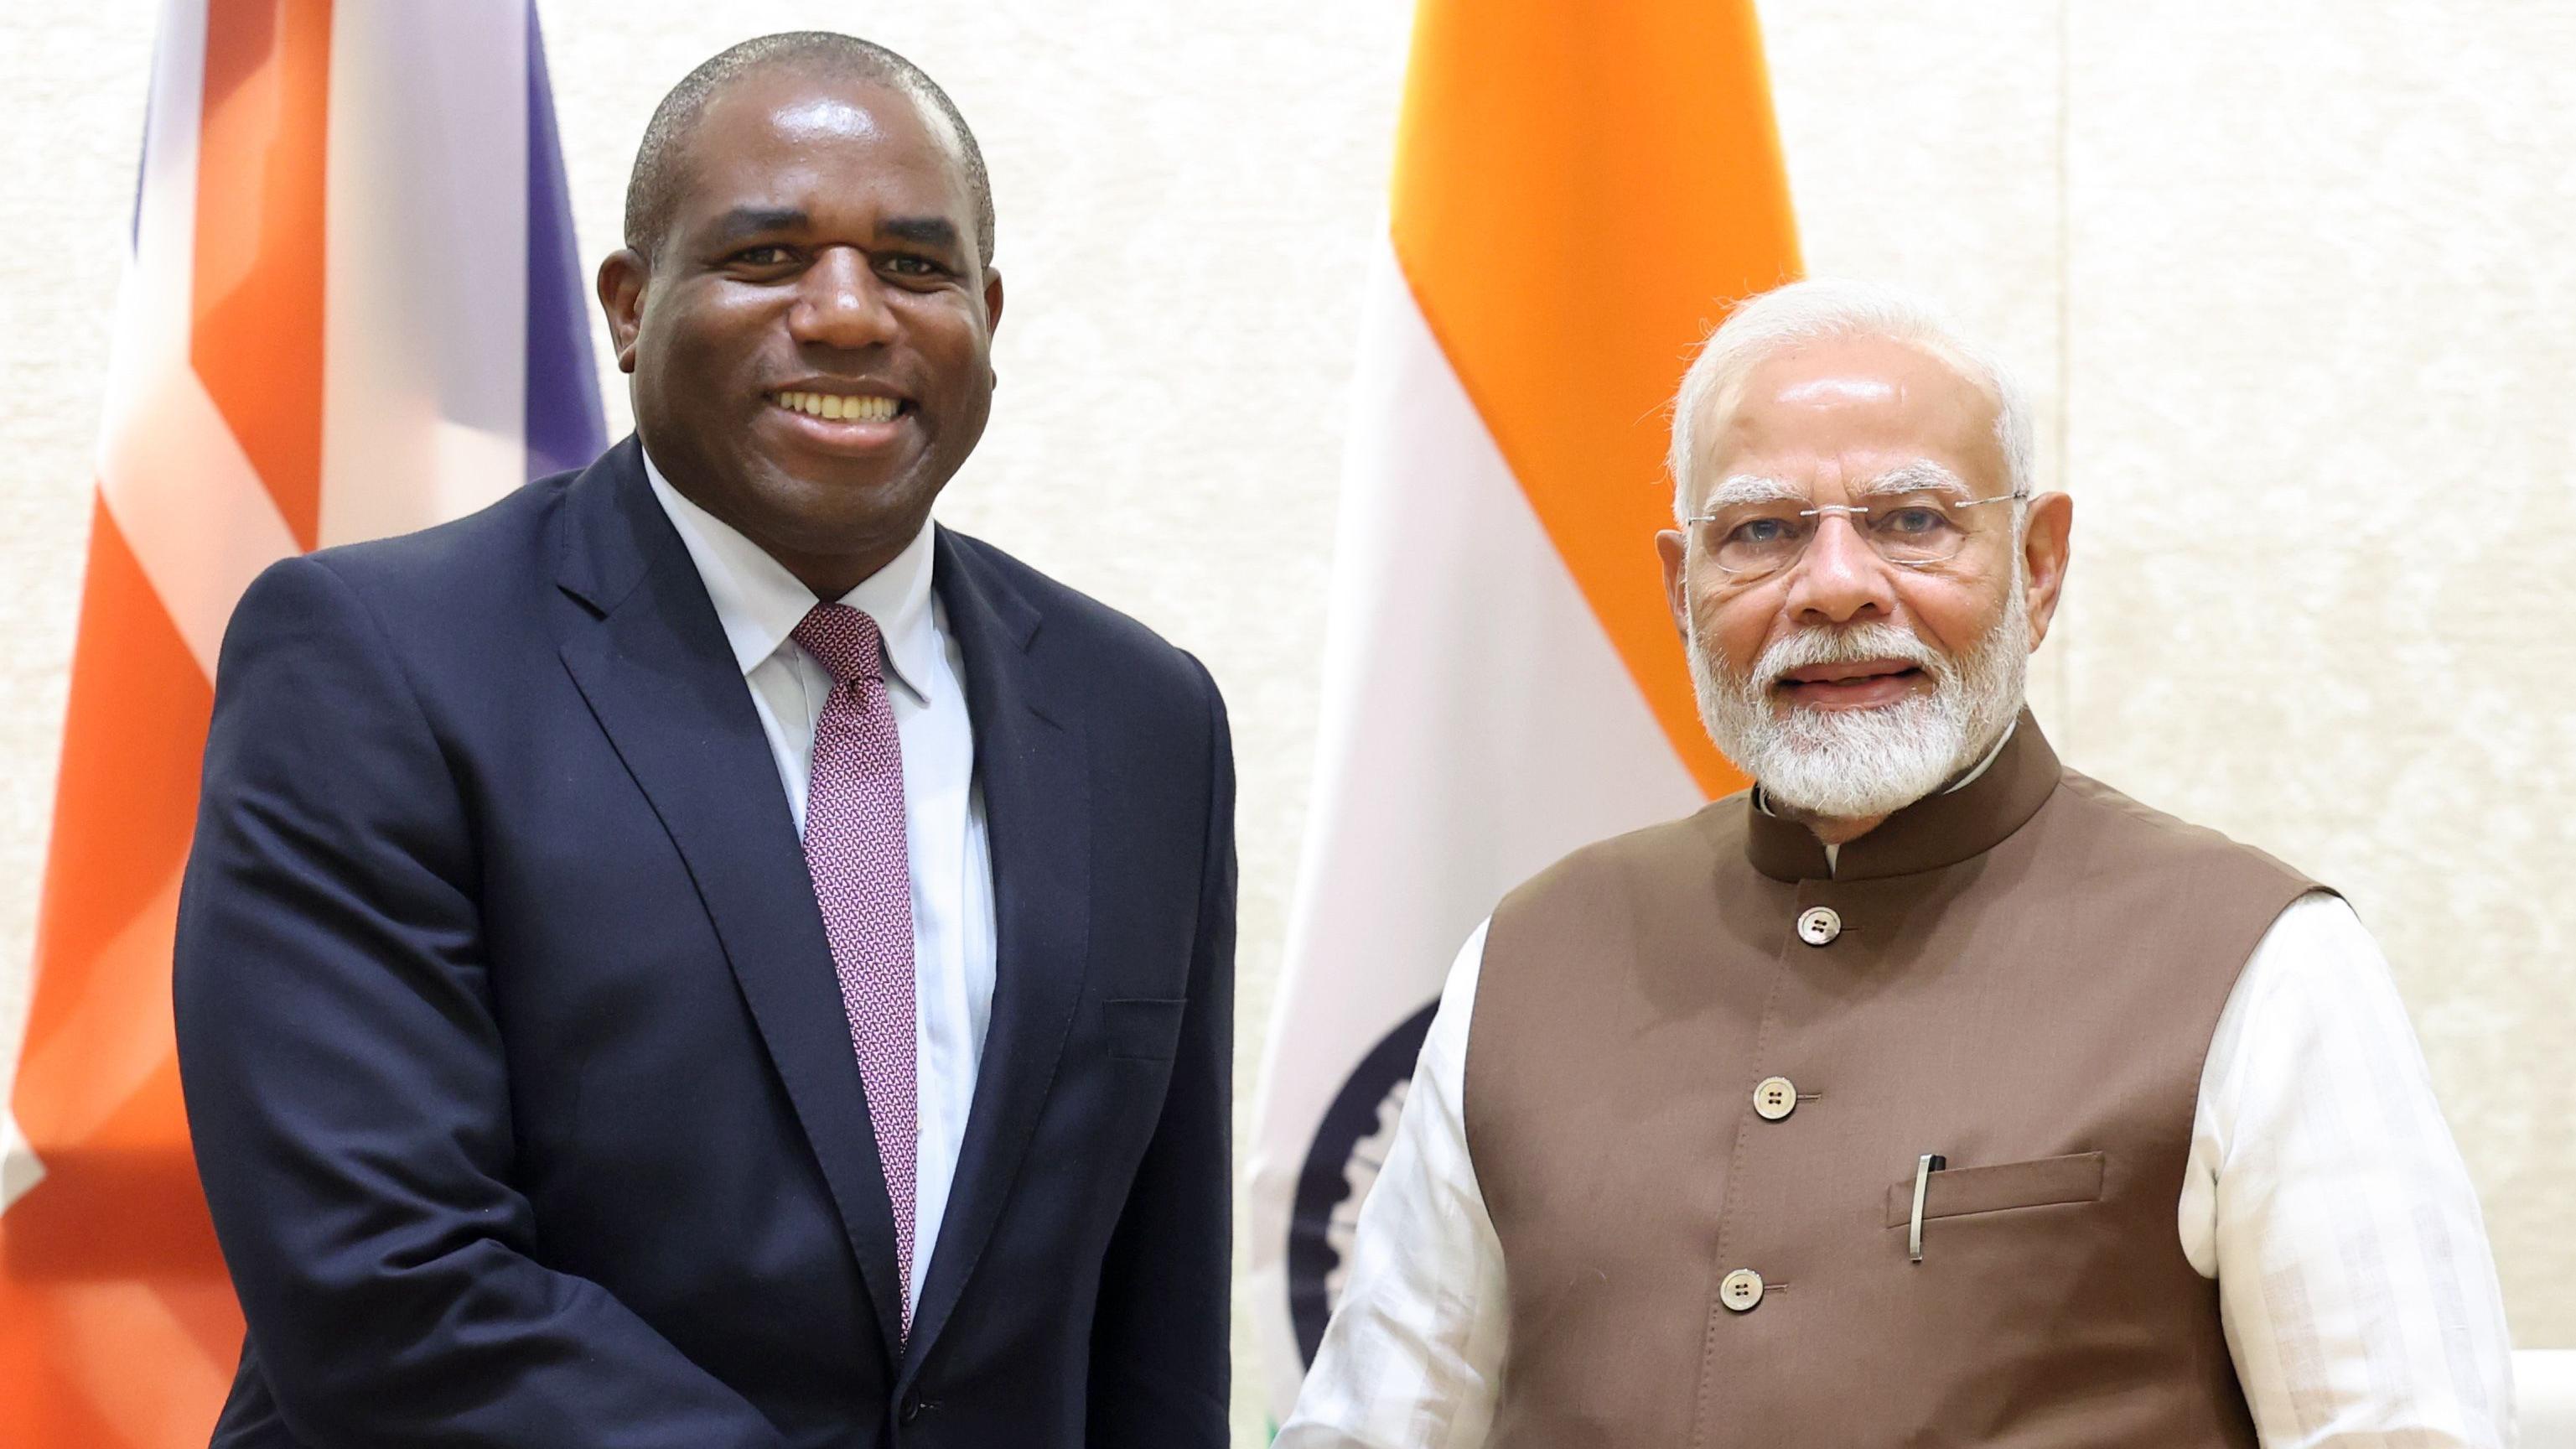 Lammy aims to reset UK-India ties with early trip